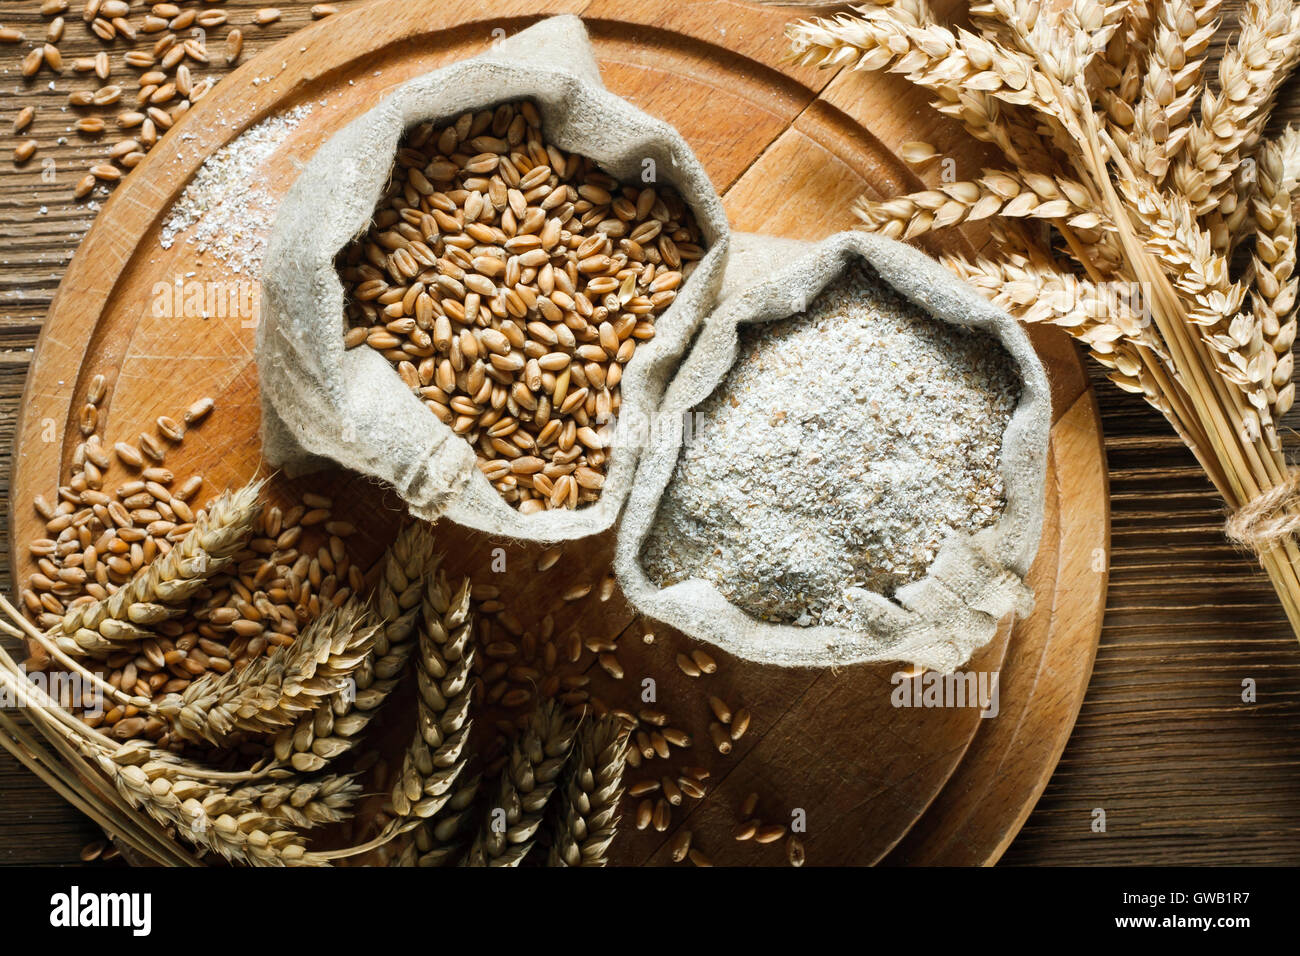 Wheat and wholemeal flour in small bags on wooden table Stock Photo